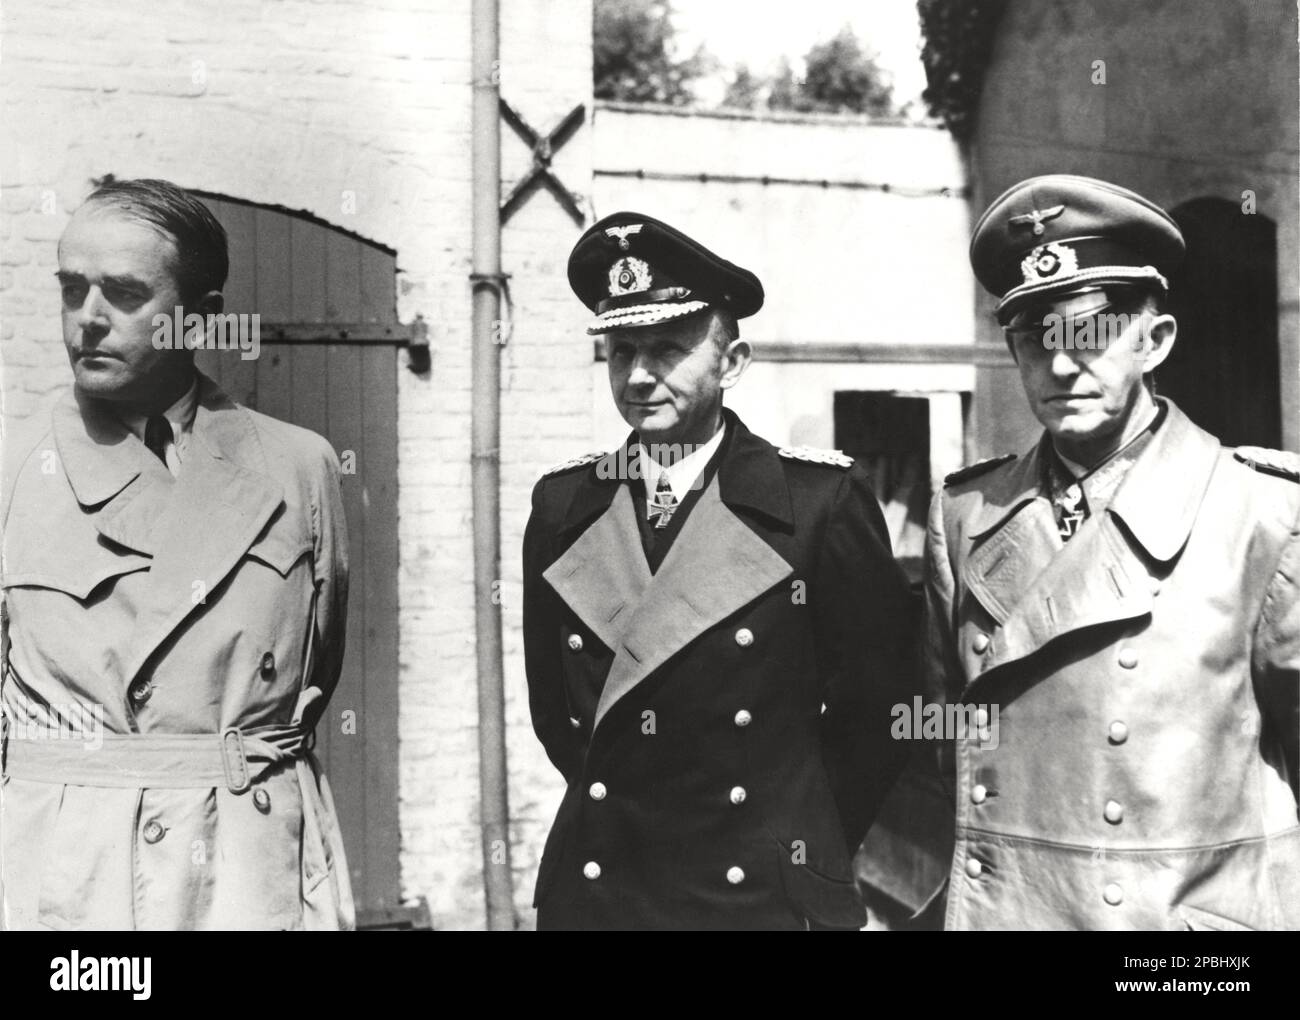 1945 , 23 may , GERMANY  : The german SS architect and Minister of Armaments ALBERT SPEER ( 1905 - 1981 ), the Grand Asmiralnaval Commander  KARL DOENITZ ( 1891 - 1980 , nomined Fuhrer of 3nd Reich after the death of Adolf Hitler , for 20 days ) and the Chief of the Operations Staff of the Armed Forces High Command Colonel General ALFRED JODL ( 1890 - 1946 ), photographed at General Quarter of BRITISH army after the capture . Jodl signed the instruments of unconditional surrender on May 7, 1945 in Reims as the representative of Karl Donitz . Only Alfred Jodl at Nuremberg judgement  was tried, Stock Photo